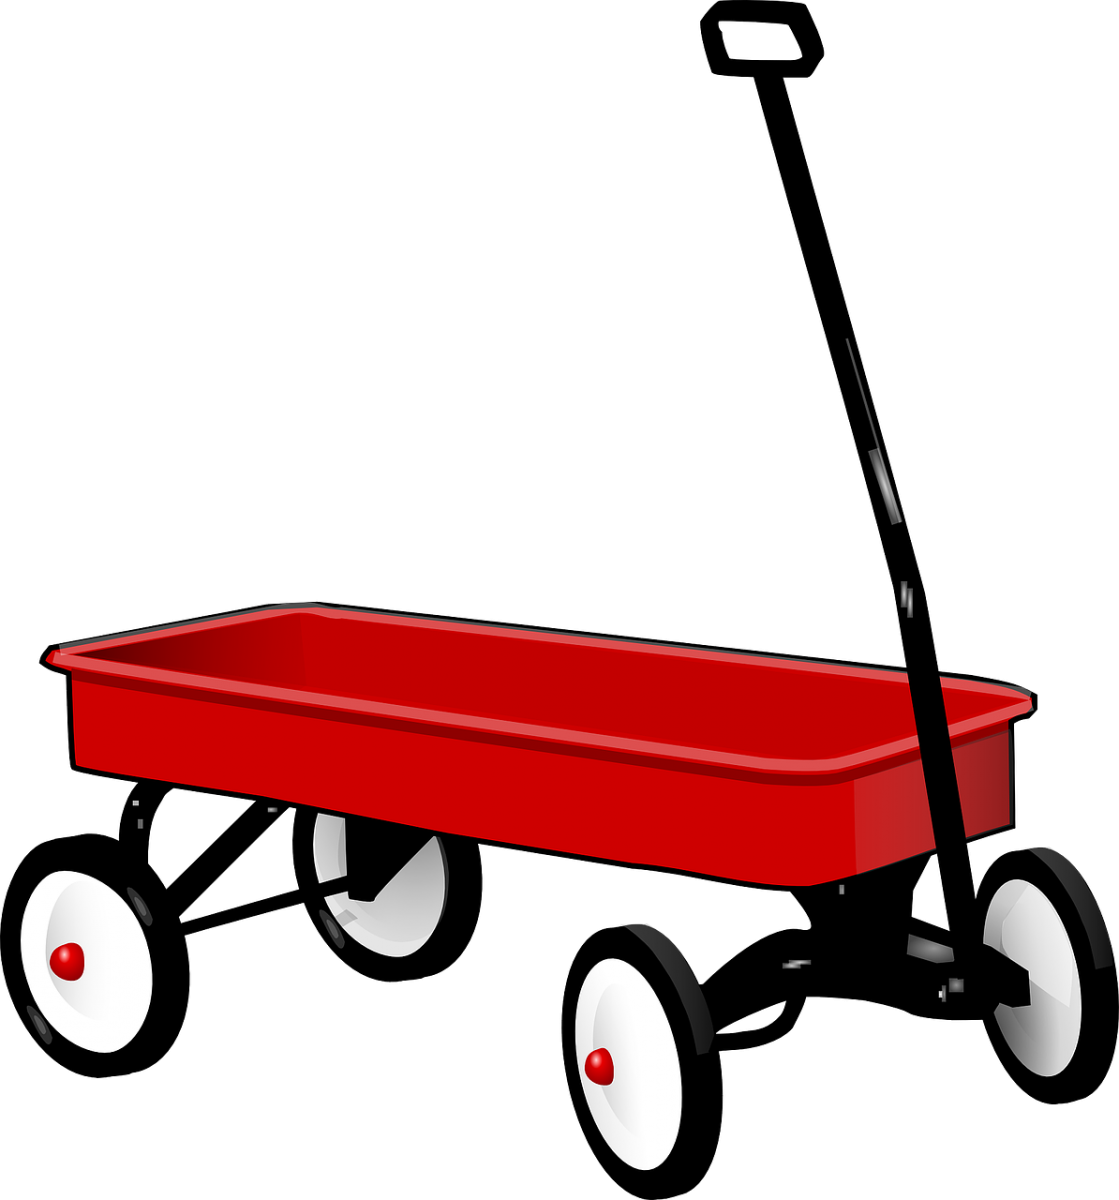 Little Red Wagon Png - Little Red Wagon Post 1/5/16, Transparent background PNG HD thumbnail